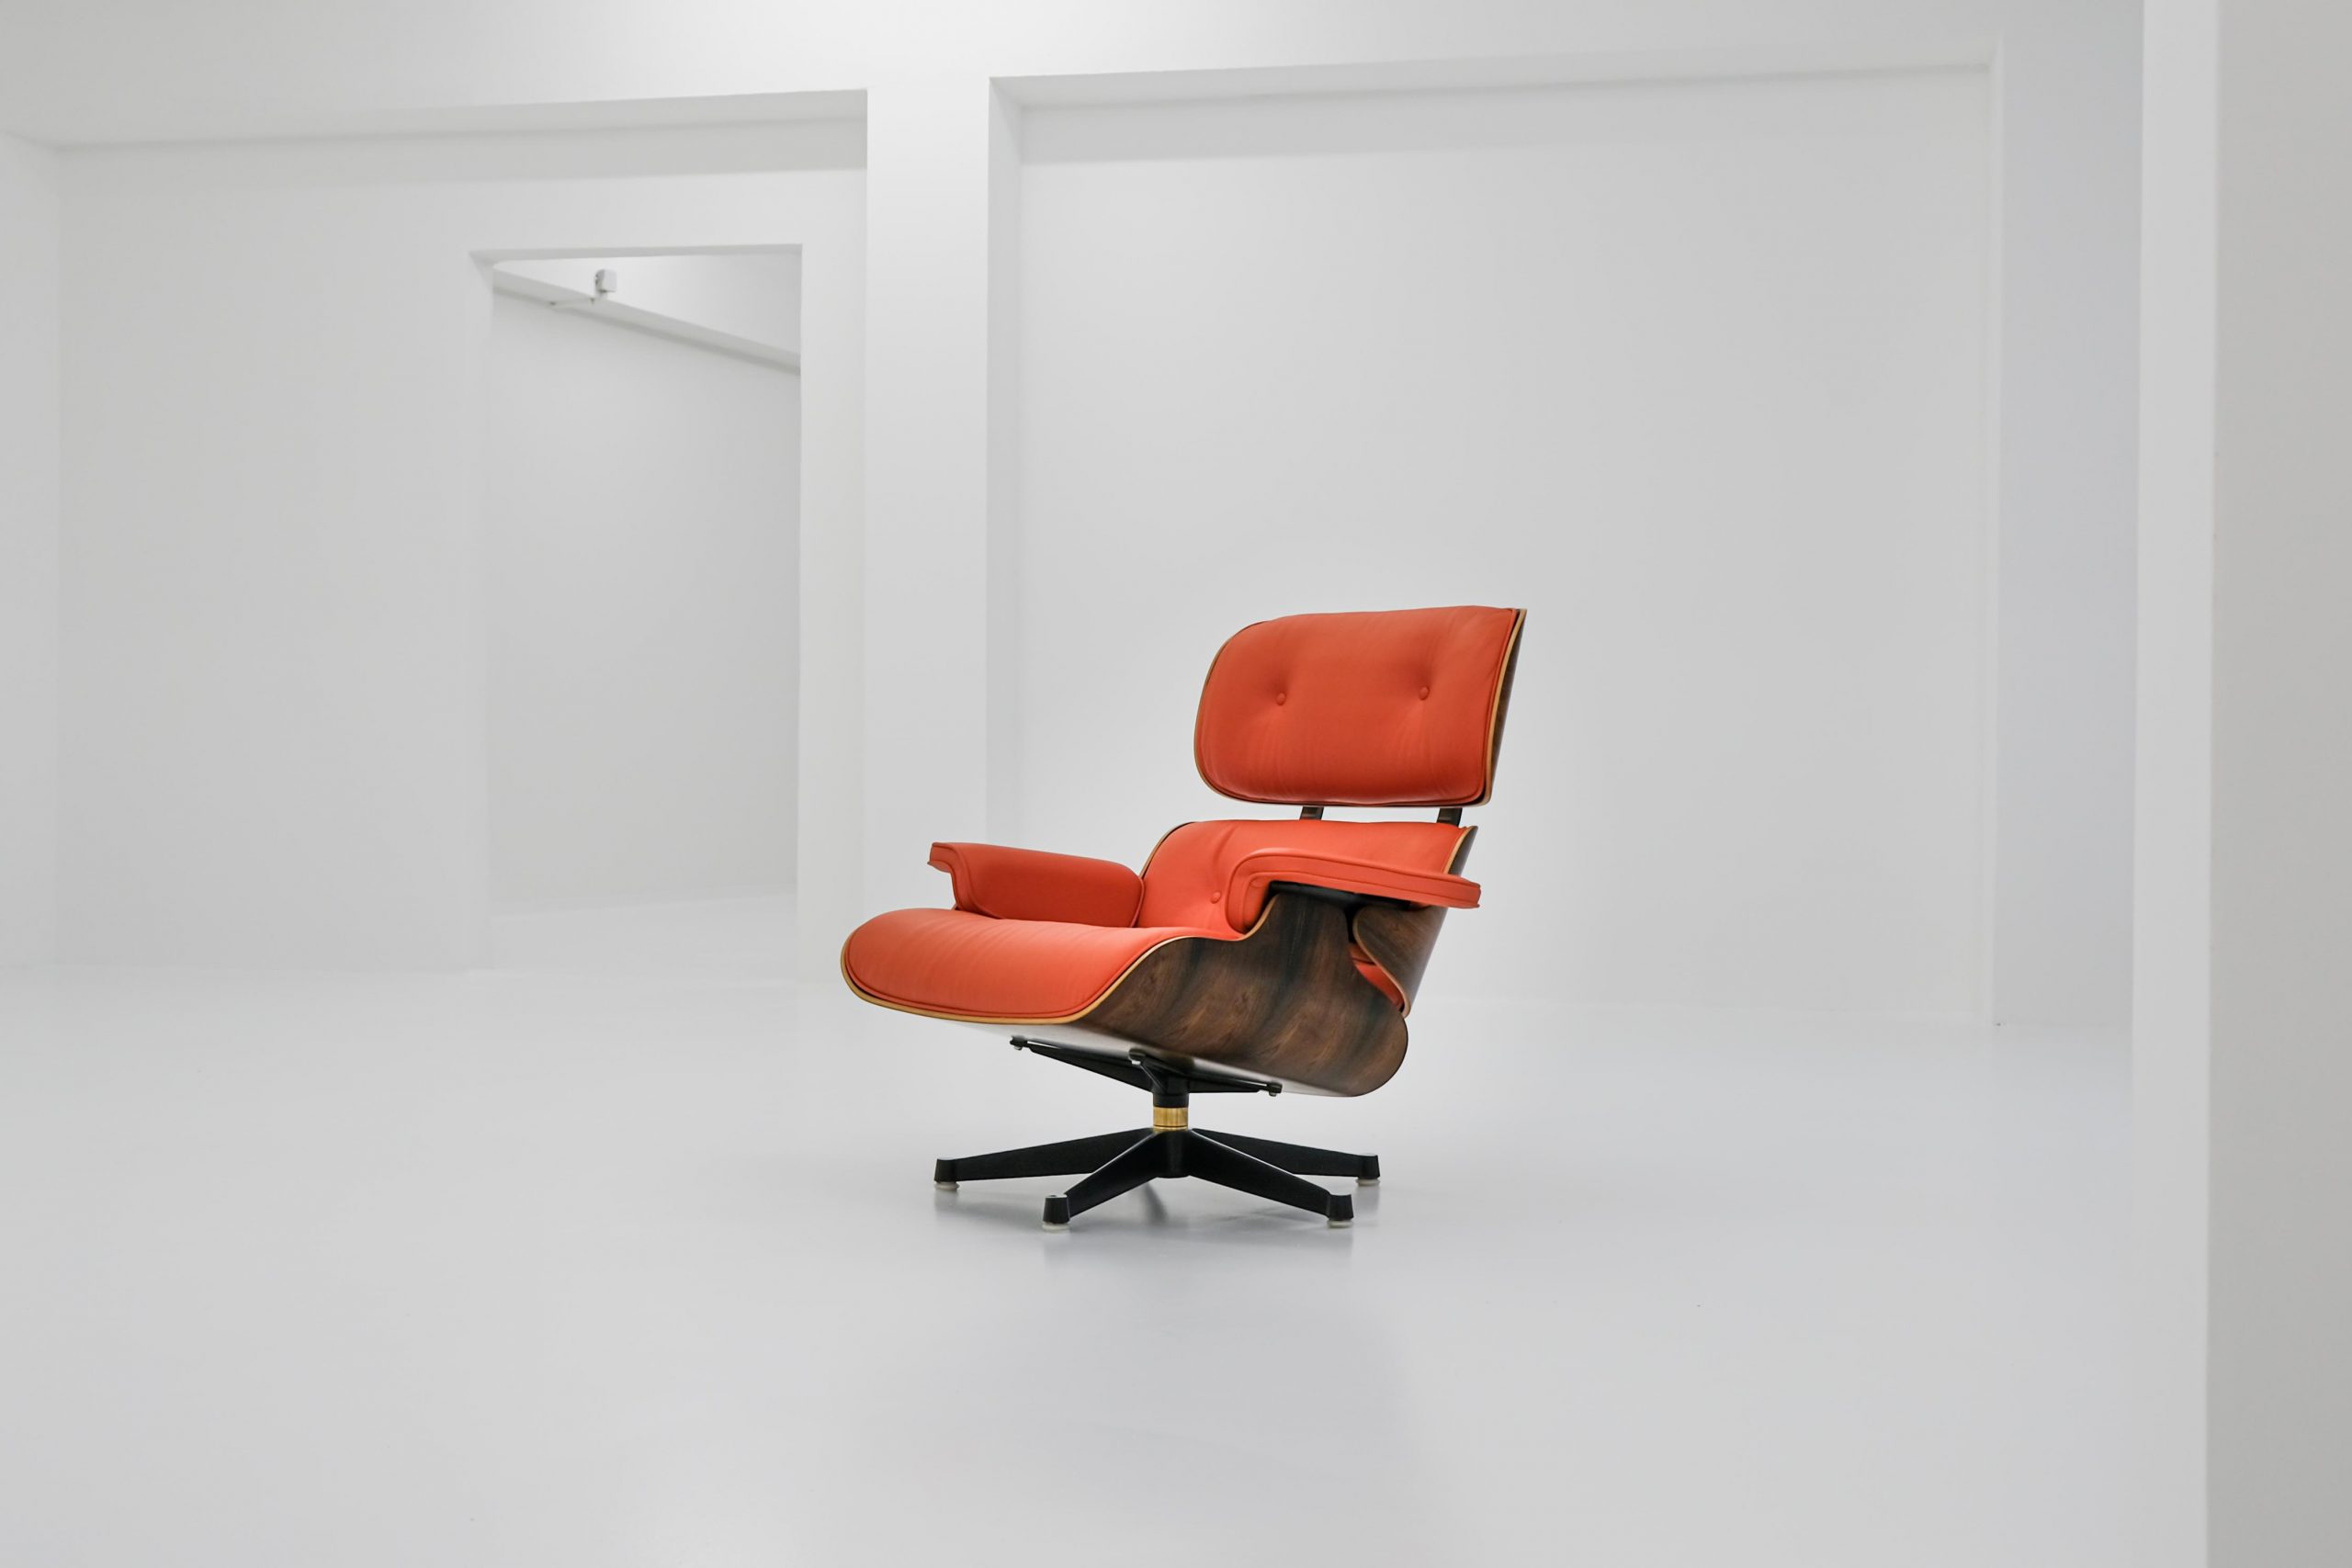 eames, ray eames, charles eames, lounge chair, rio Palisander, Brazilian rosewood, cites, vitra, eames lounge chair